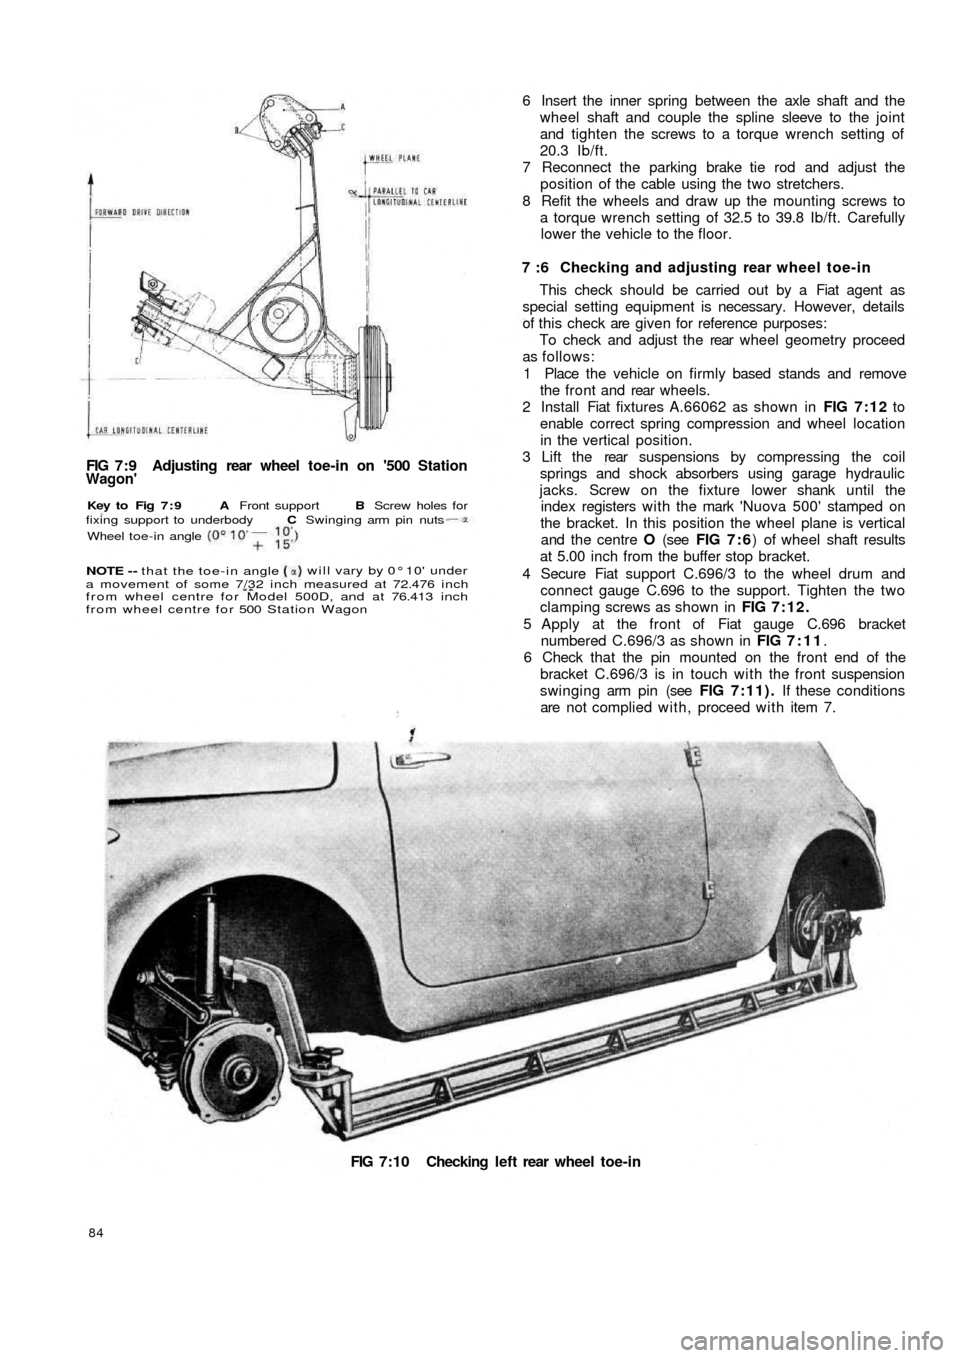 FIAT 500 1958 1.G Workshop Manual FIG 7:9  Adjusting  rear  wheel toe-in on 500 StationWagon
FIG 7:10 Checking left rear wheel toe-in
84
6 Insert the inner spring between the axle shaft and the
wheel shaft and couple the spline slee